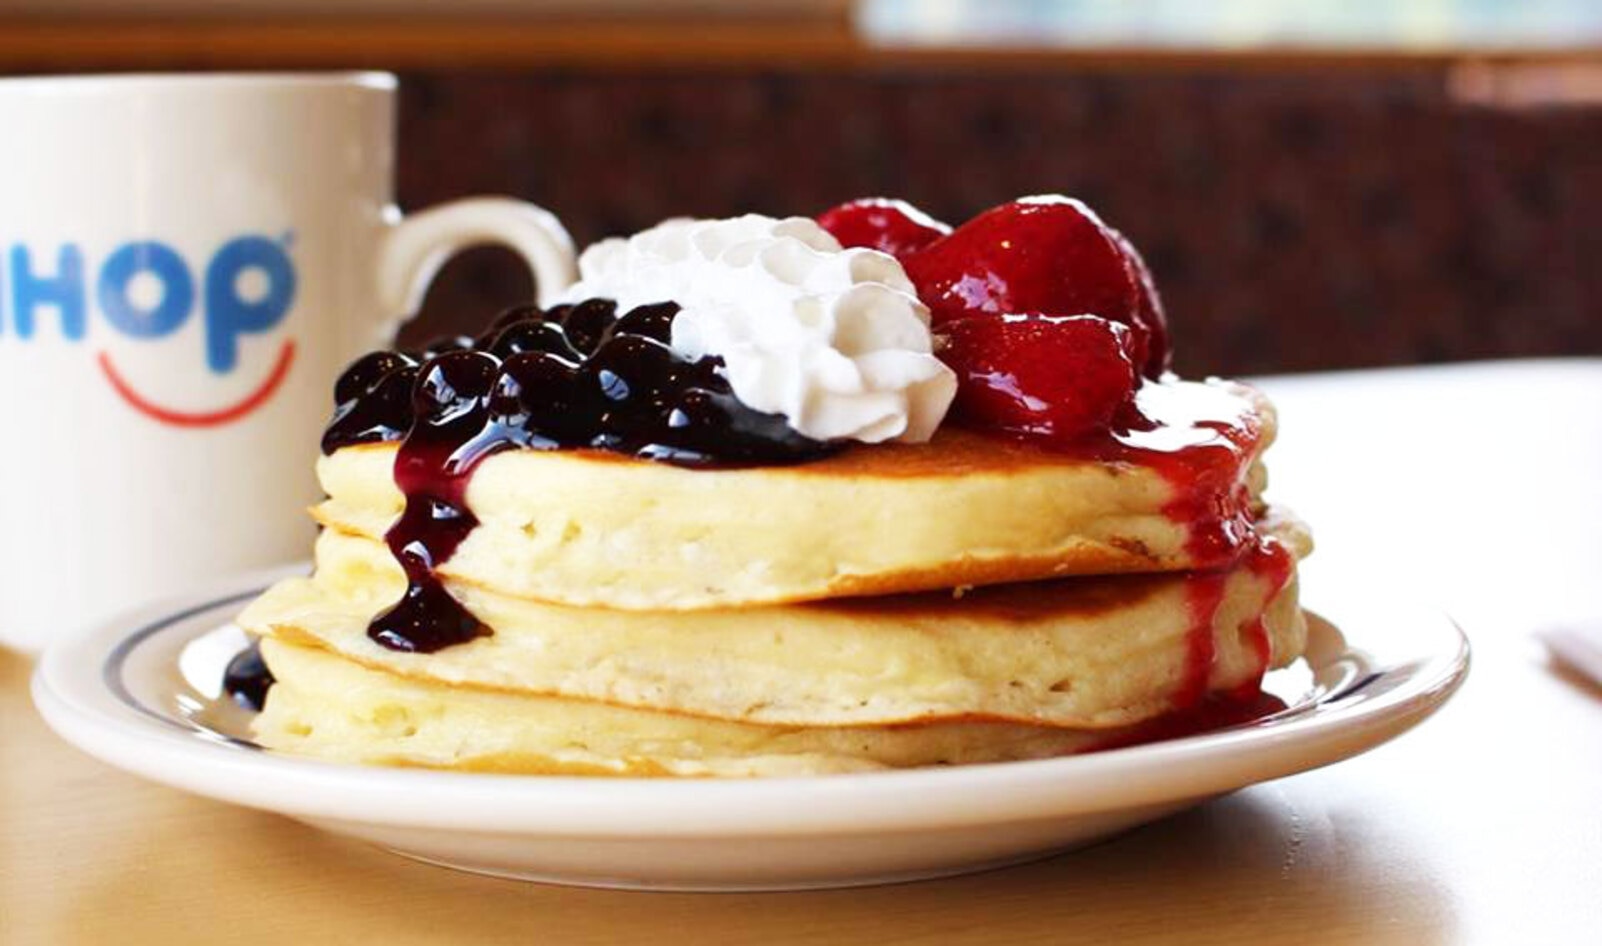 IHOP “Closely Looking Into” Launching Vegan Pancakes